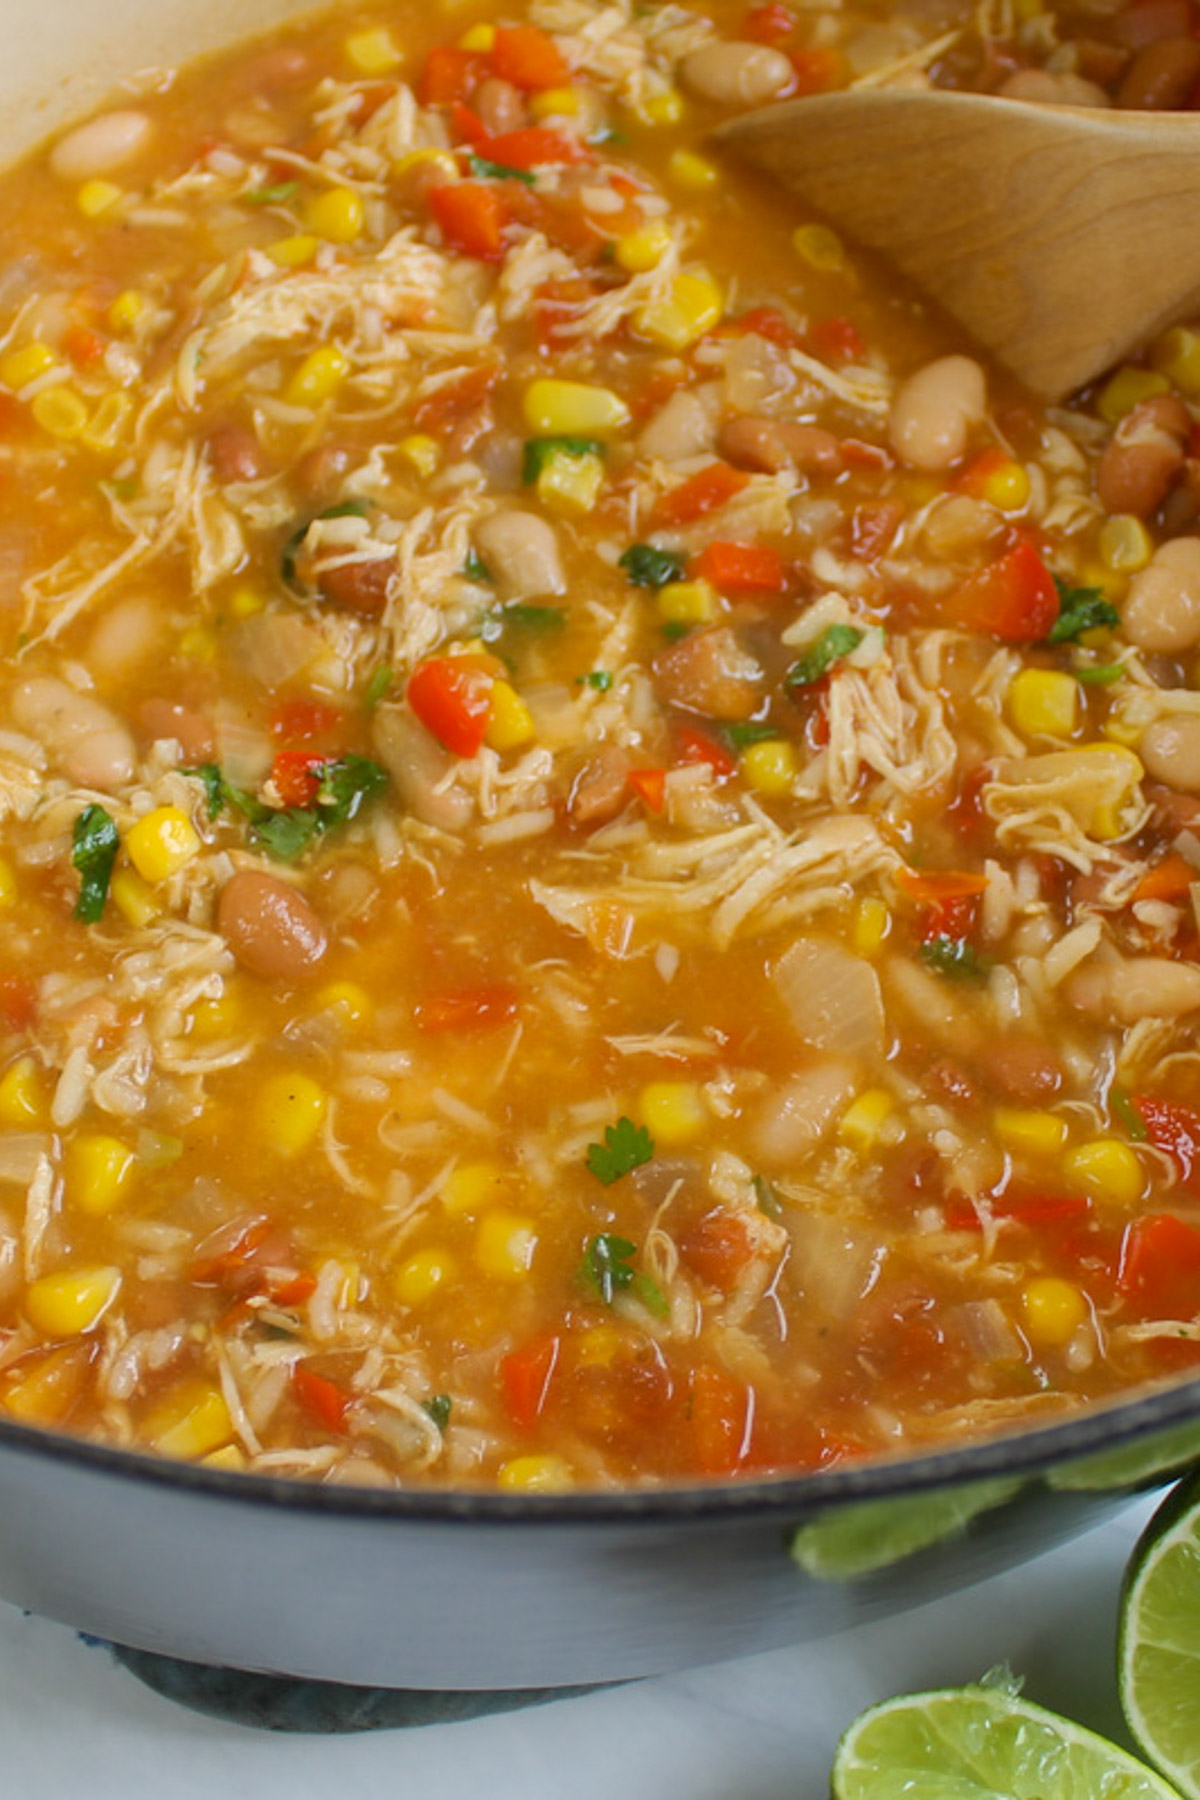 A soup pot full of chicken tortilla soup in a red tomato broth with shredded chicken, beans, and corn.